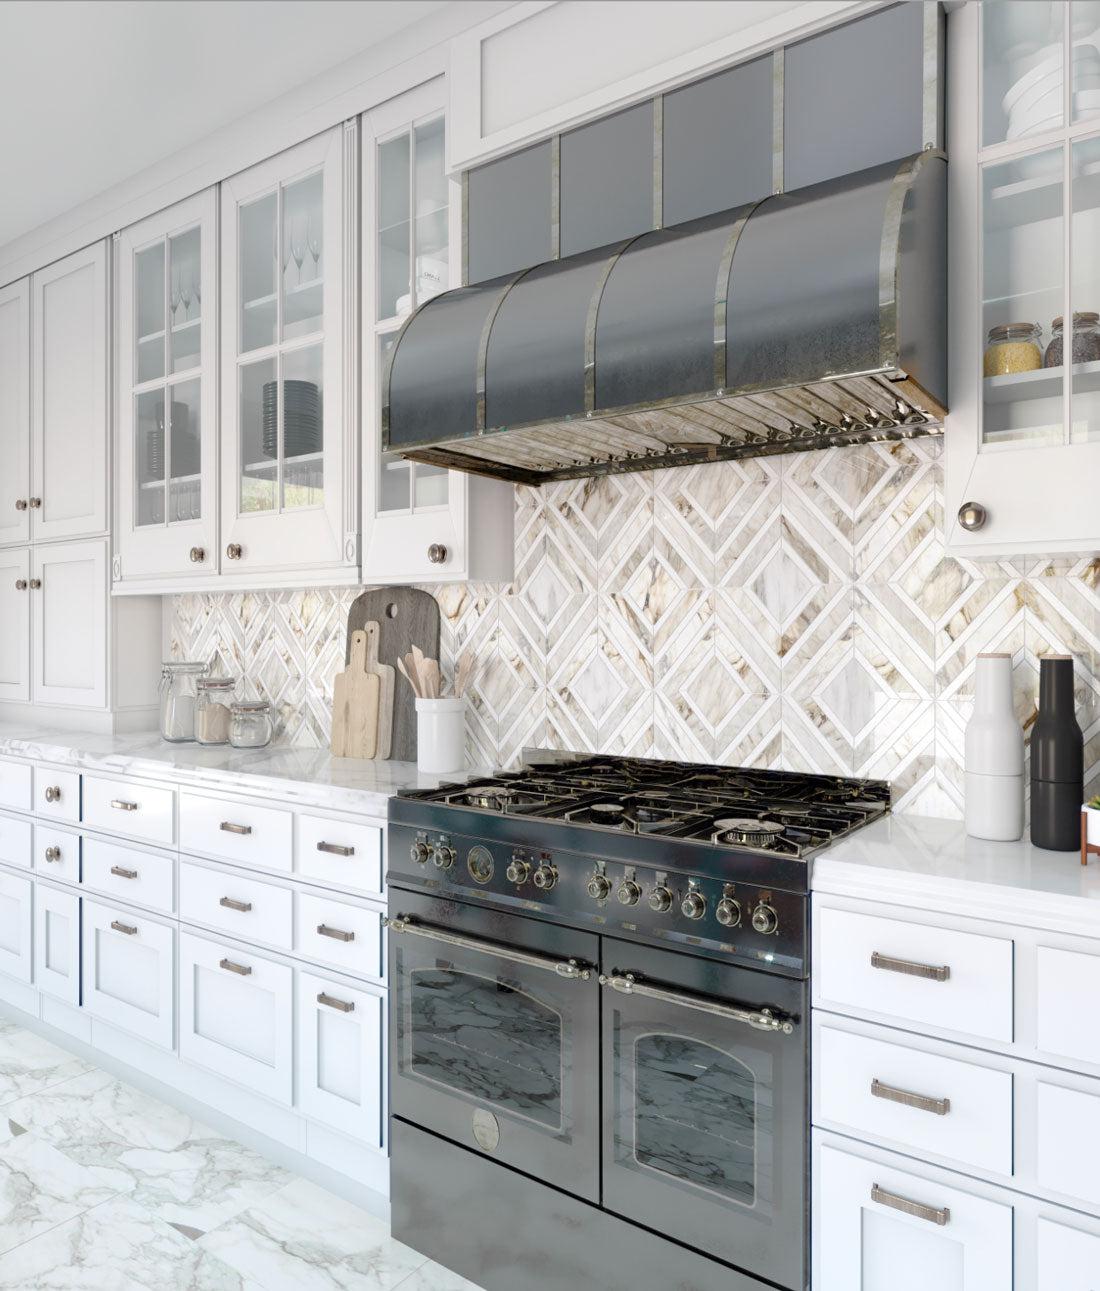 Diamond Marble Backsplash for a Gorgeous Accent Pattern to a Classic White Kitchen 